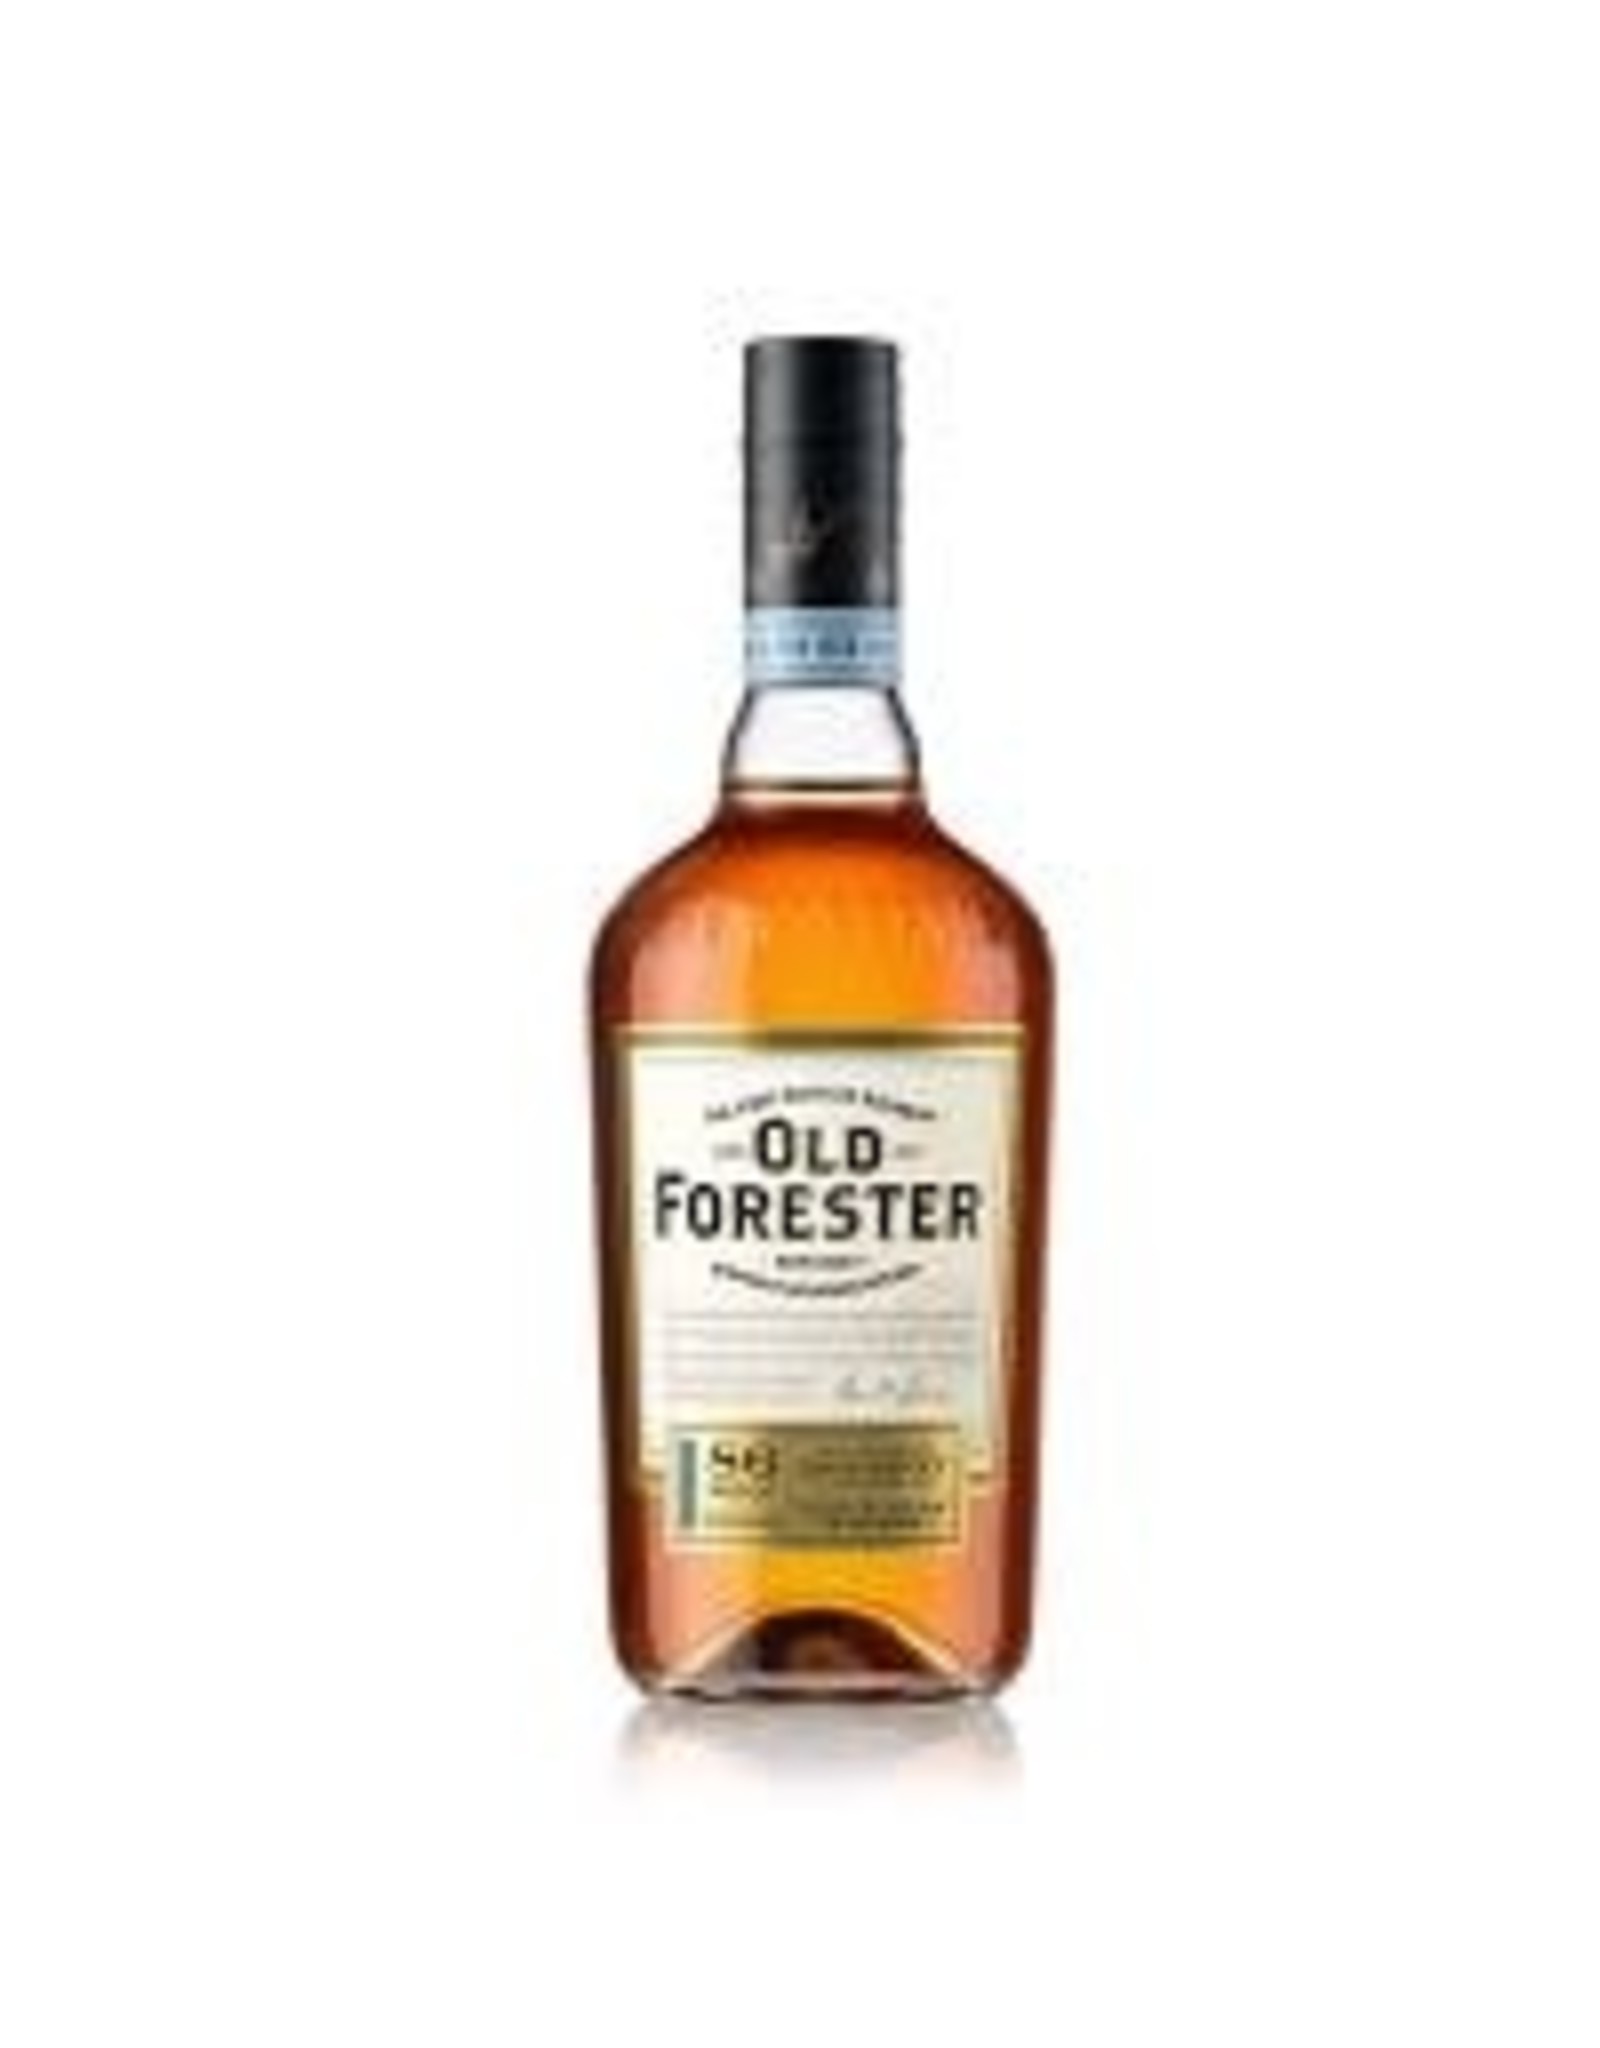 OLD FORESTER BOURBON 750ml